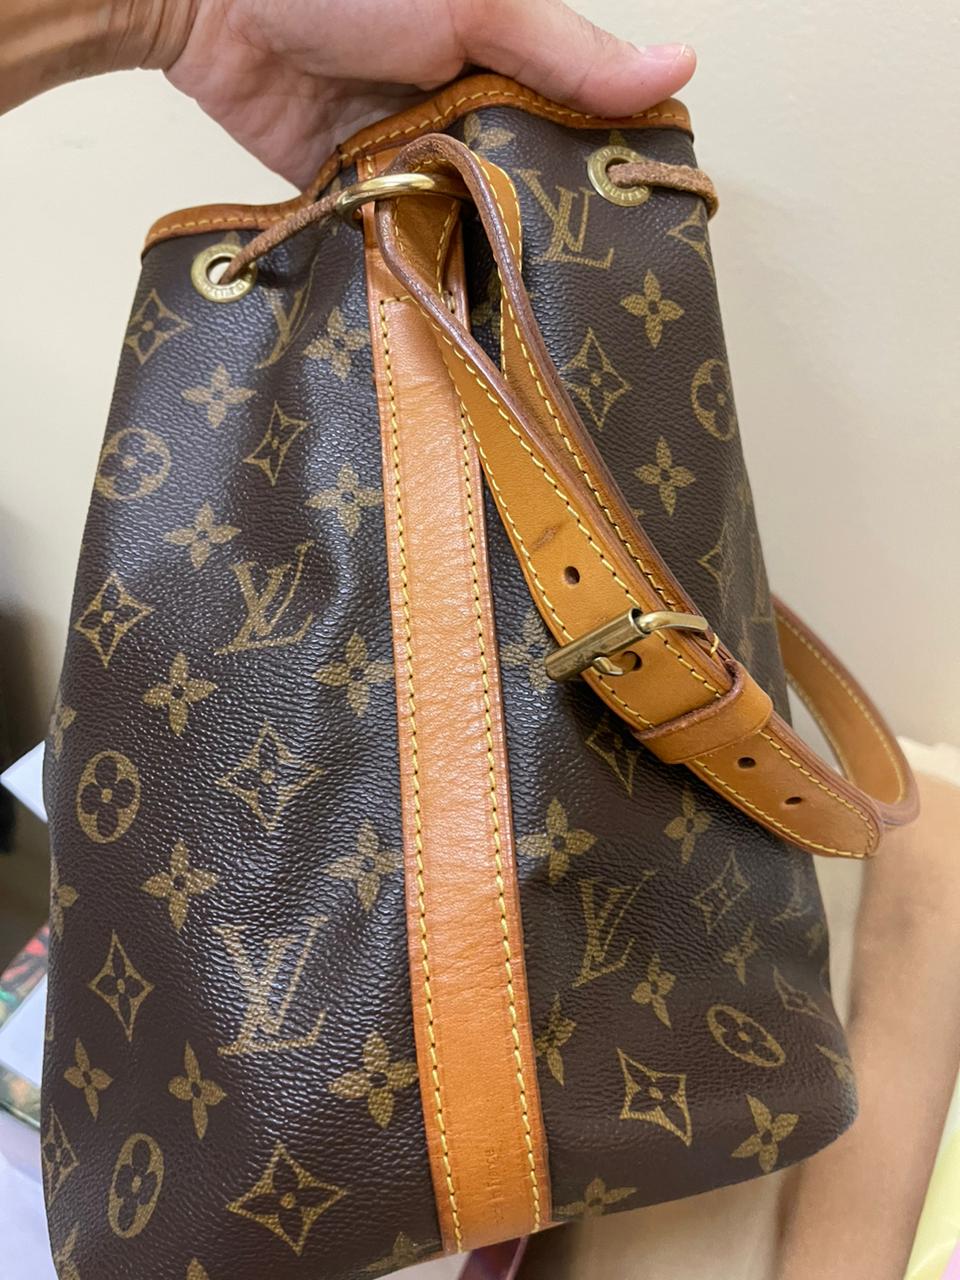 LOUIS VUITTON PETIT NOE - 1 Year Review & Update, Would I Still Buy? 